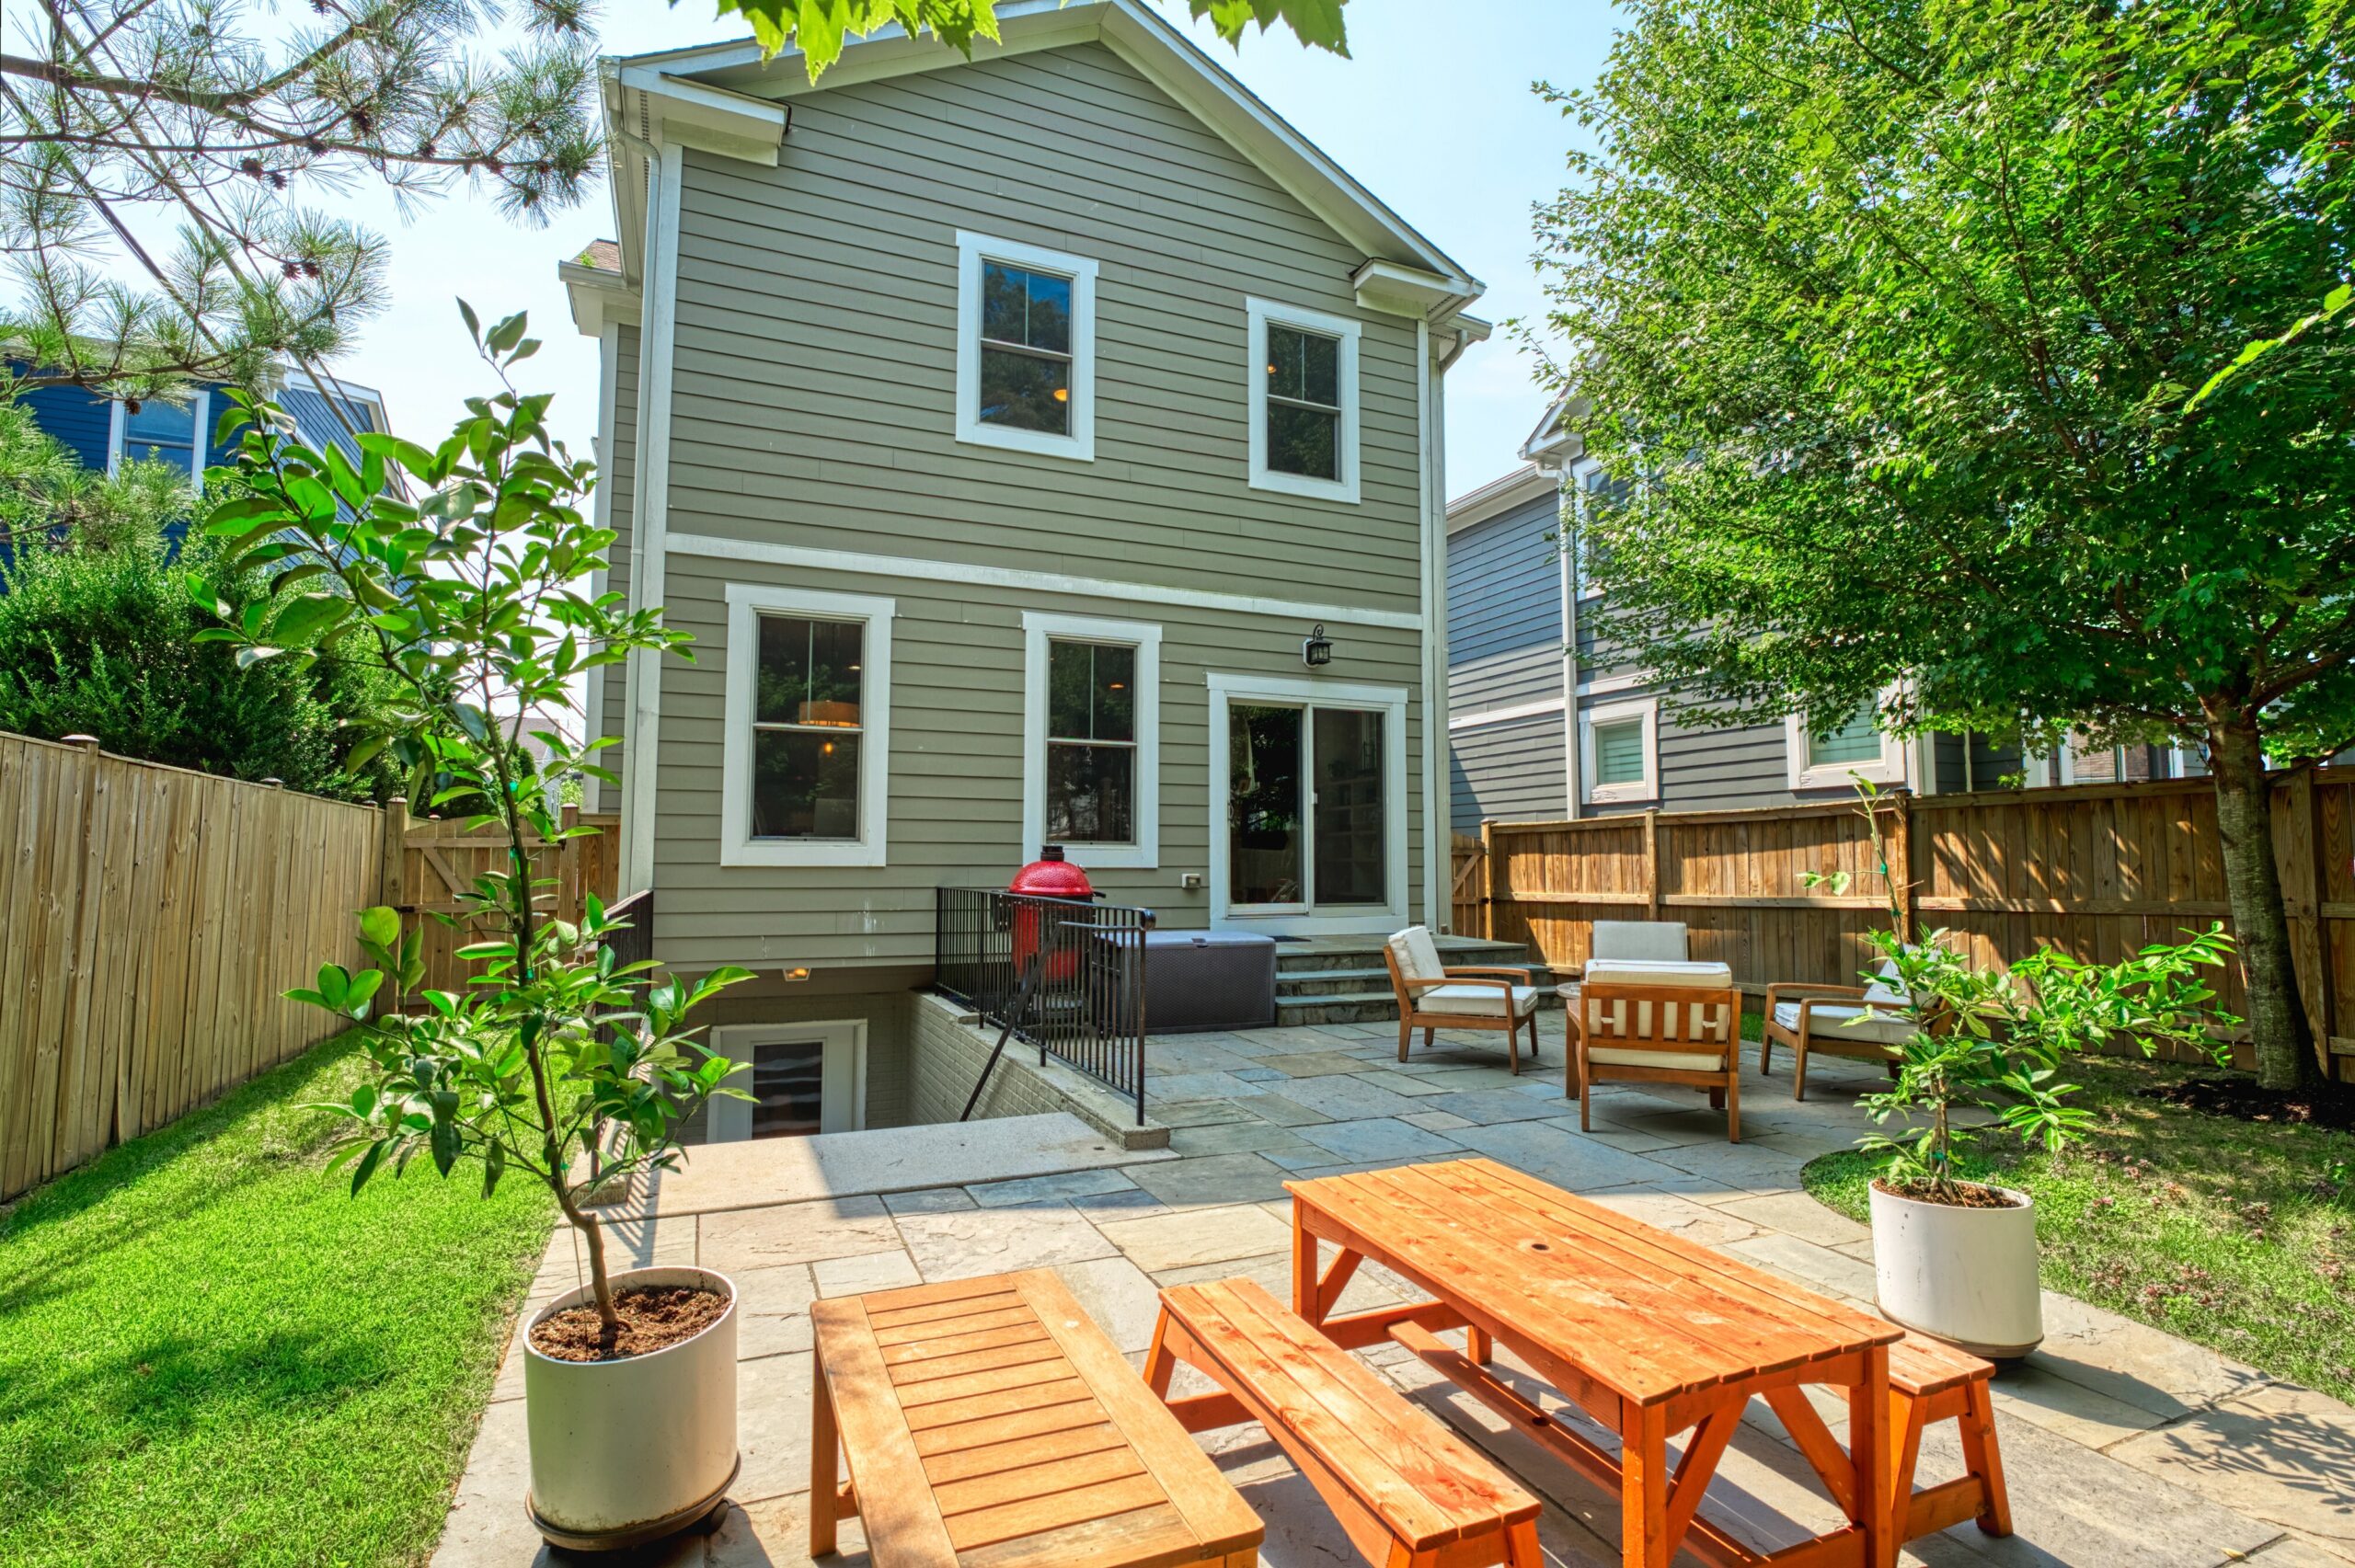 Professional exterior photo of 505 N West St - showing the rear view from the backyard just off the patio, with child size picnic table and benches, stairs down to the walkout basement and other patio furniture near main rear door